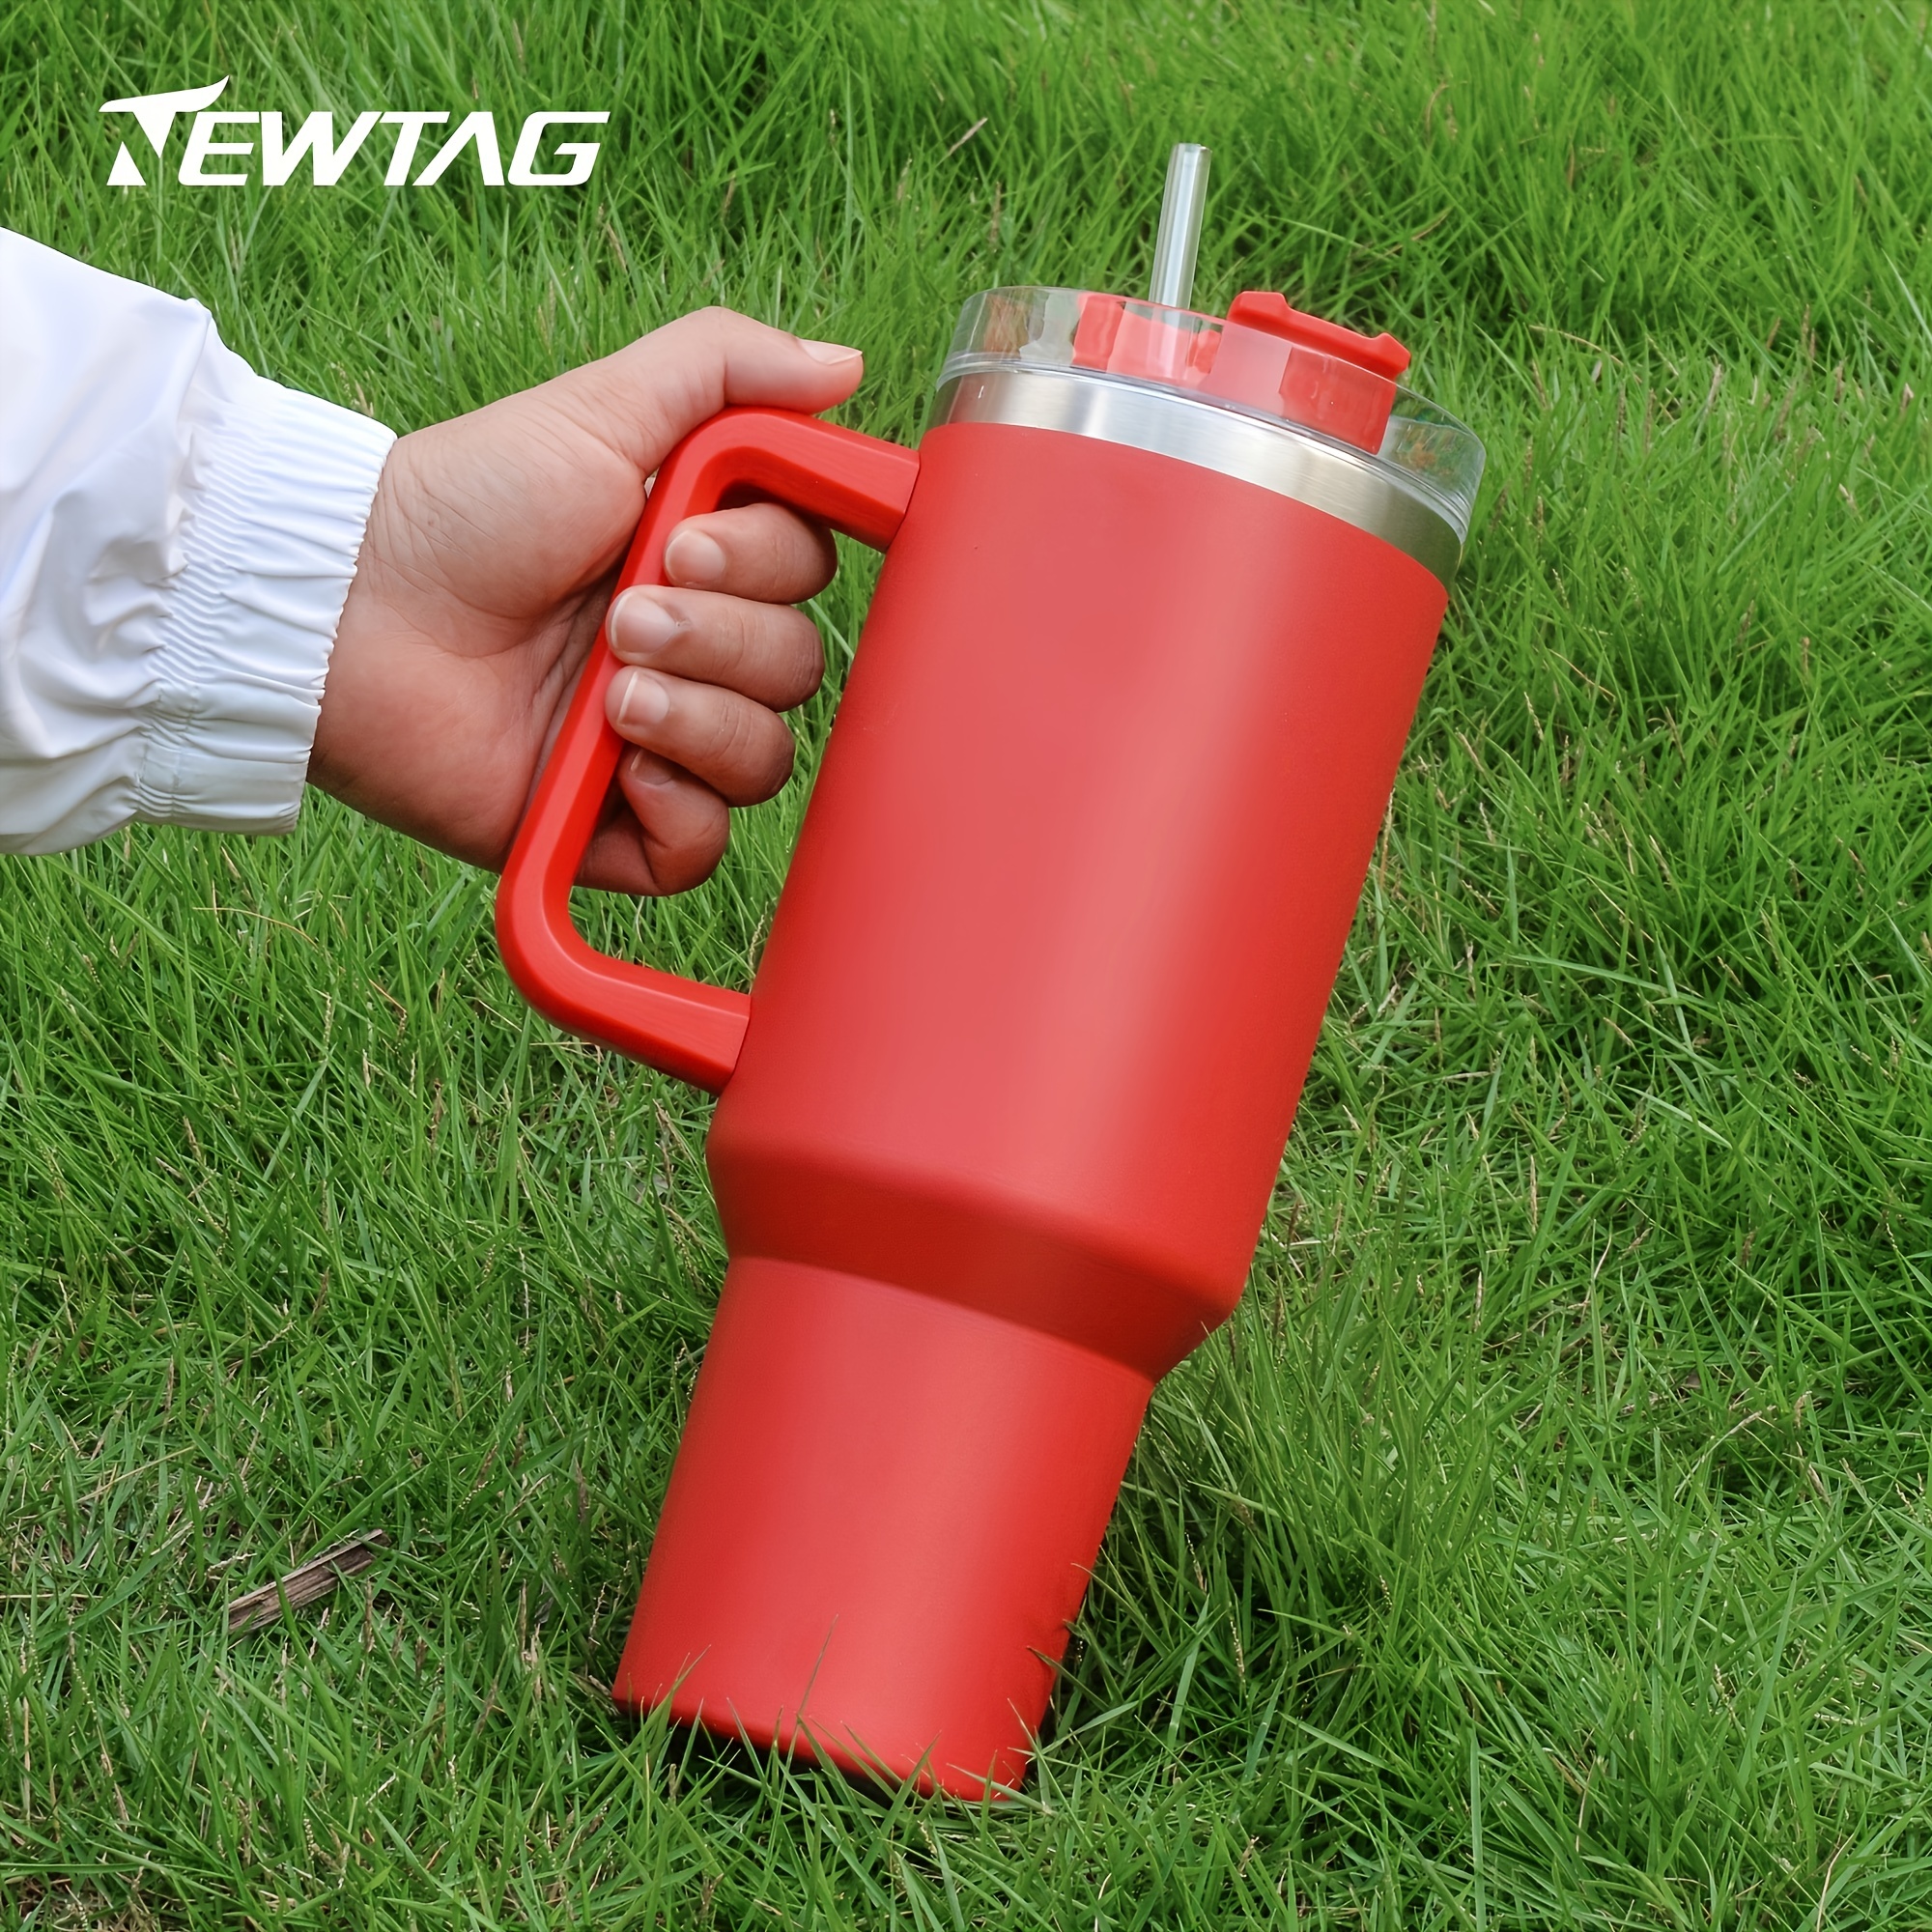 Simple Modern Tumbler With Handle And Straw Lid,insulated Cup